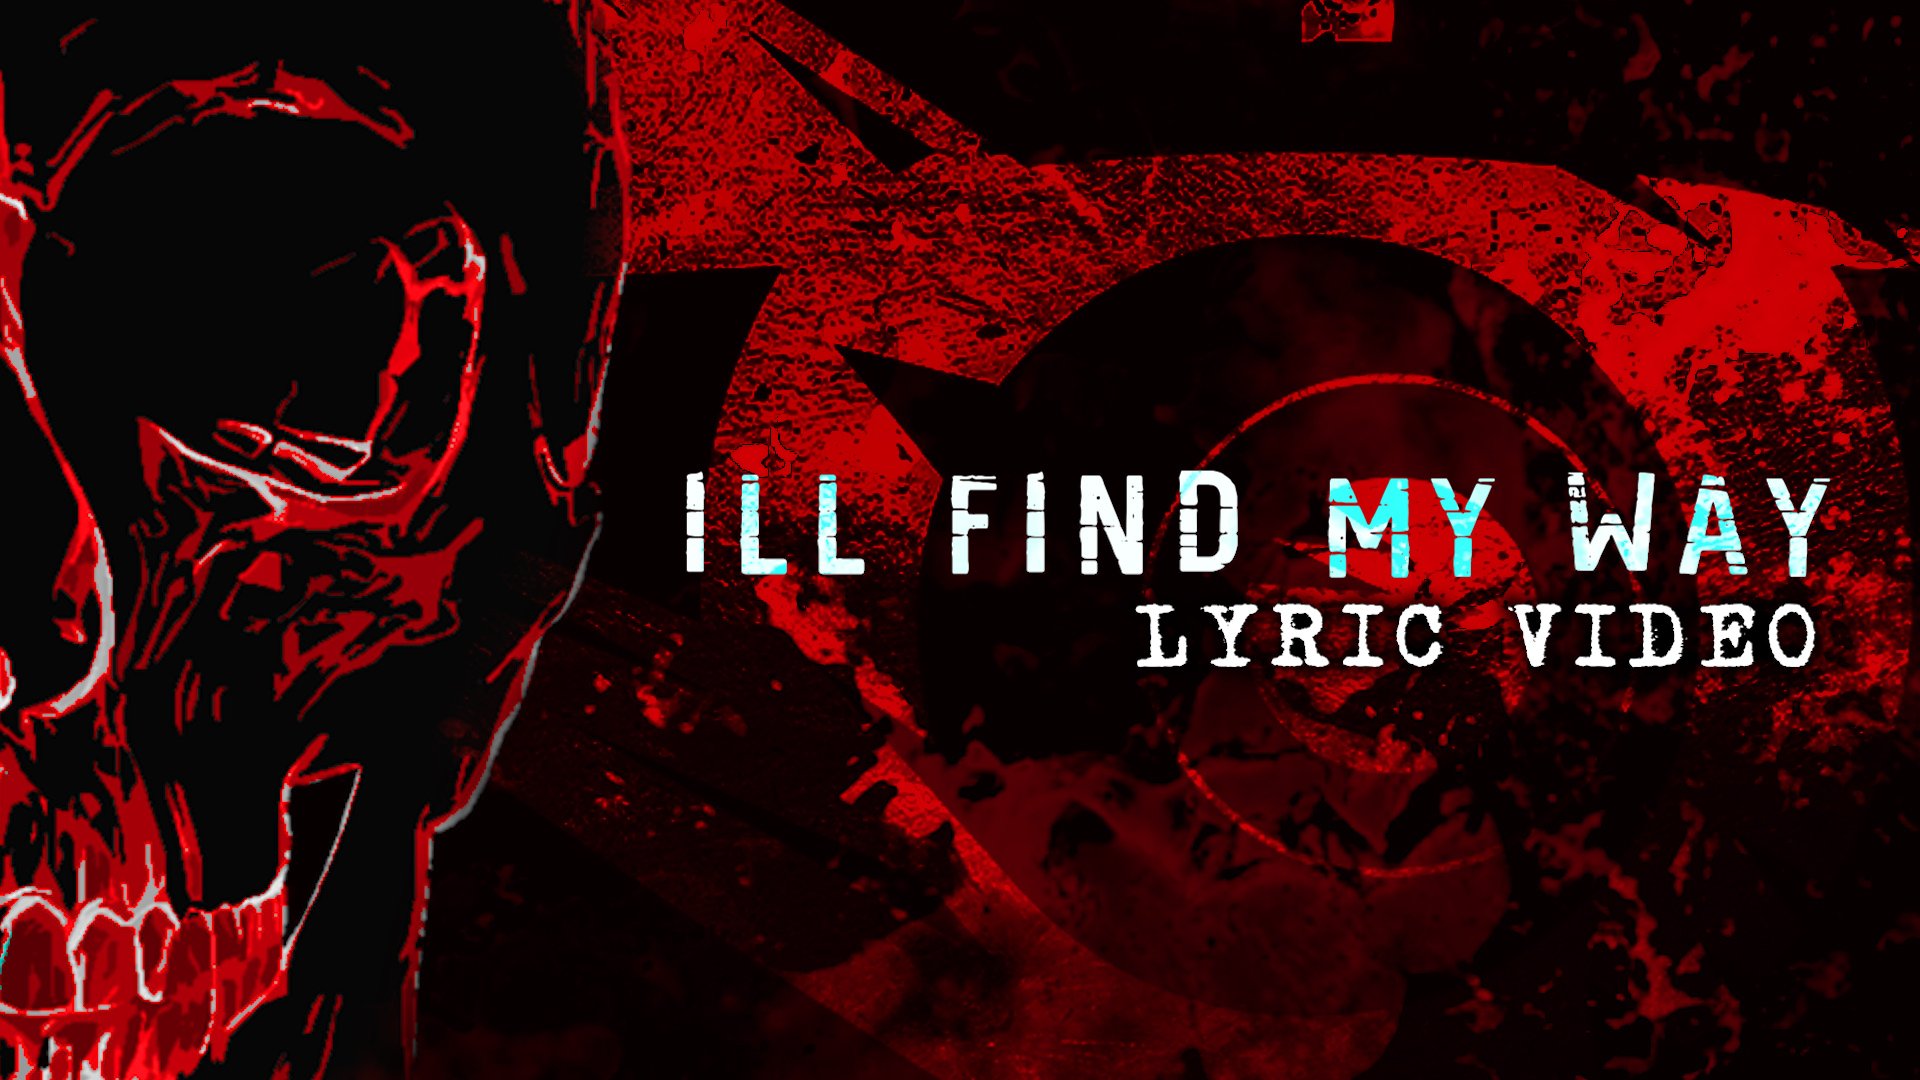 (Font help) Need font for "I'll Find My Way" and "Lyric Video"